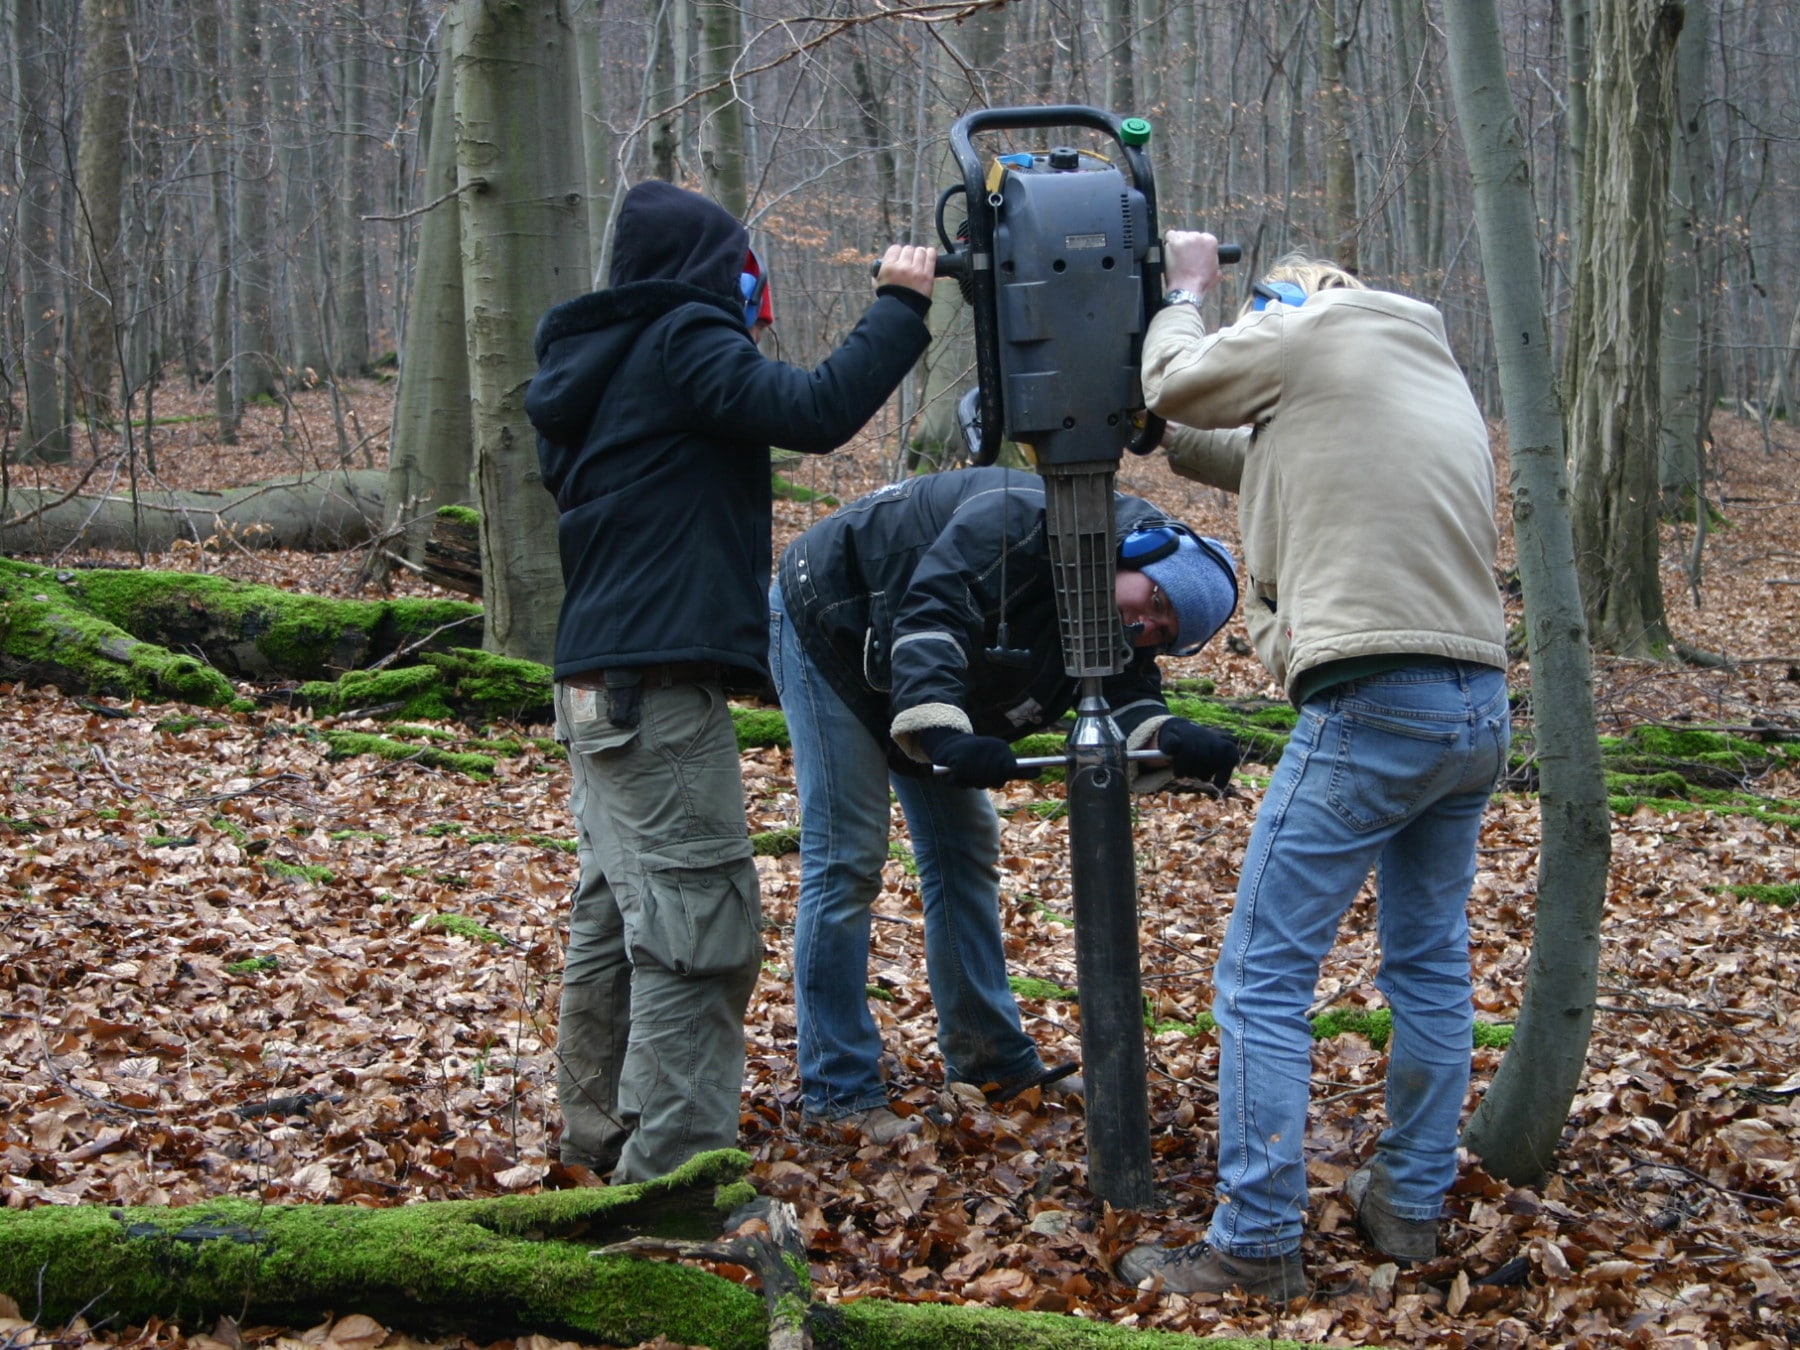 Picture: The photo shows three men in the forest holding and aligning a core drill rig for soil sampling.